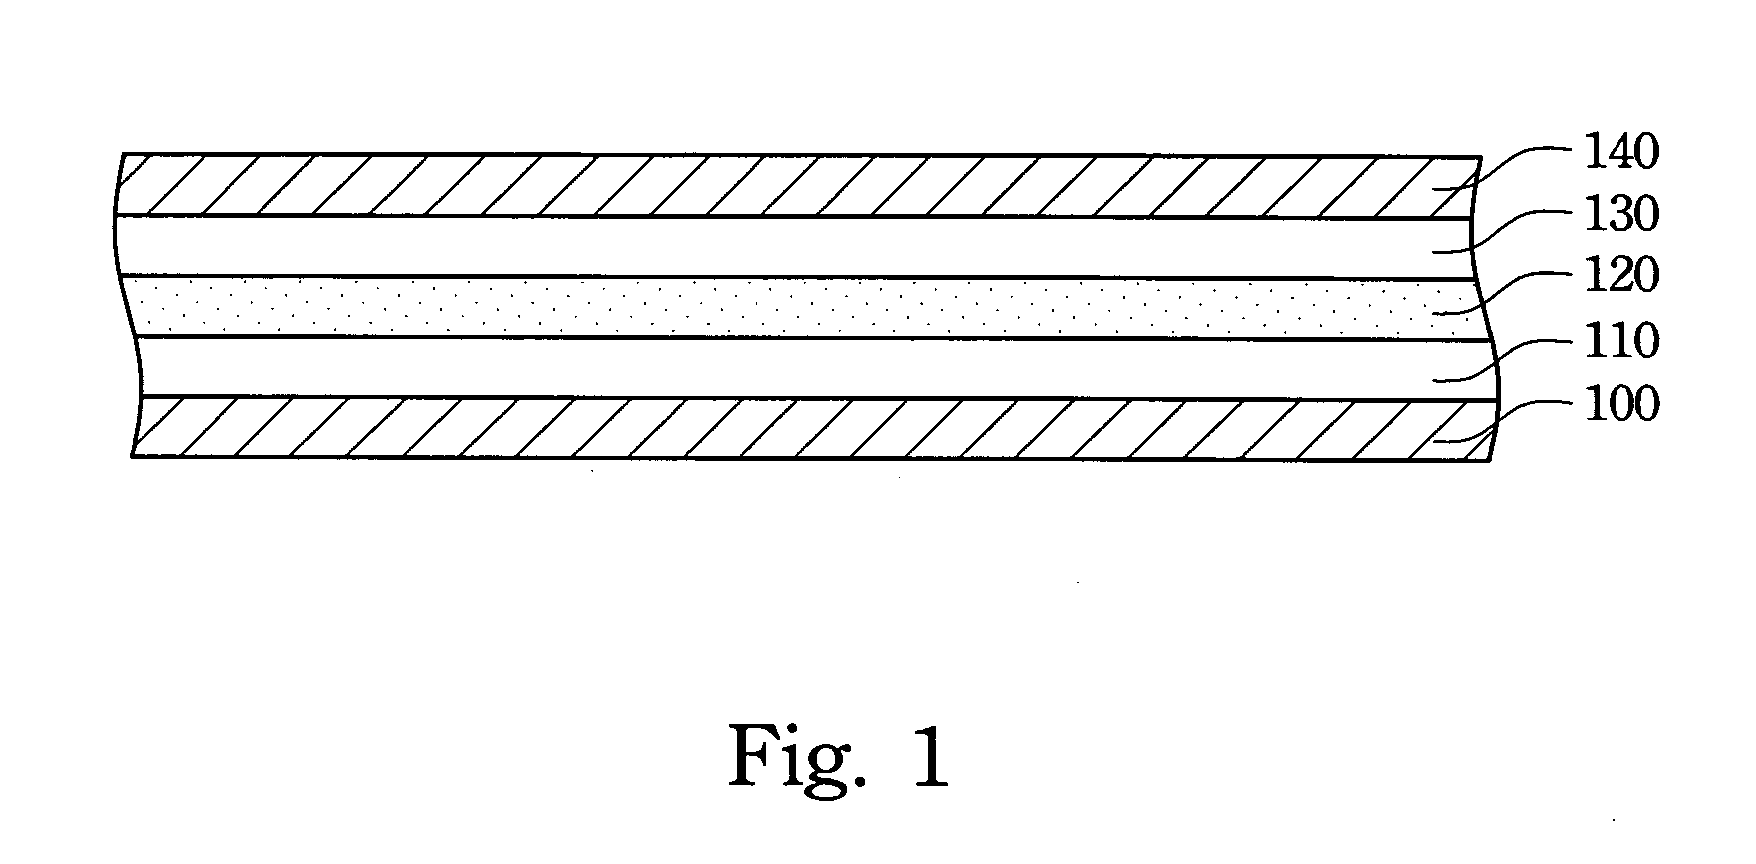 Polyimide based flexible copper clad laminates and method of producing the same